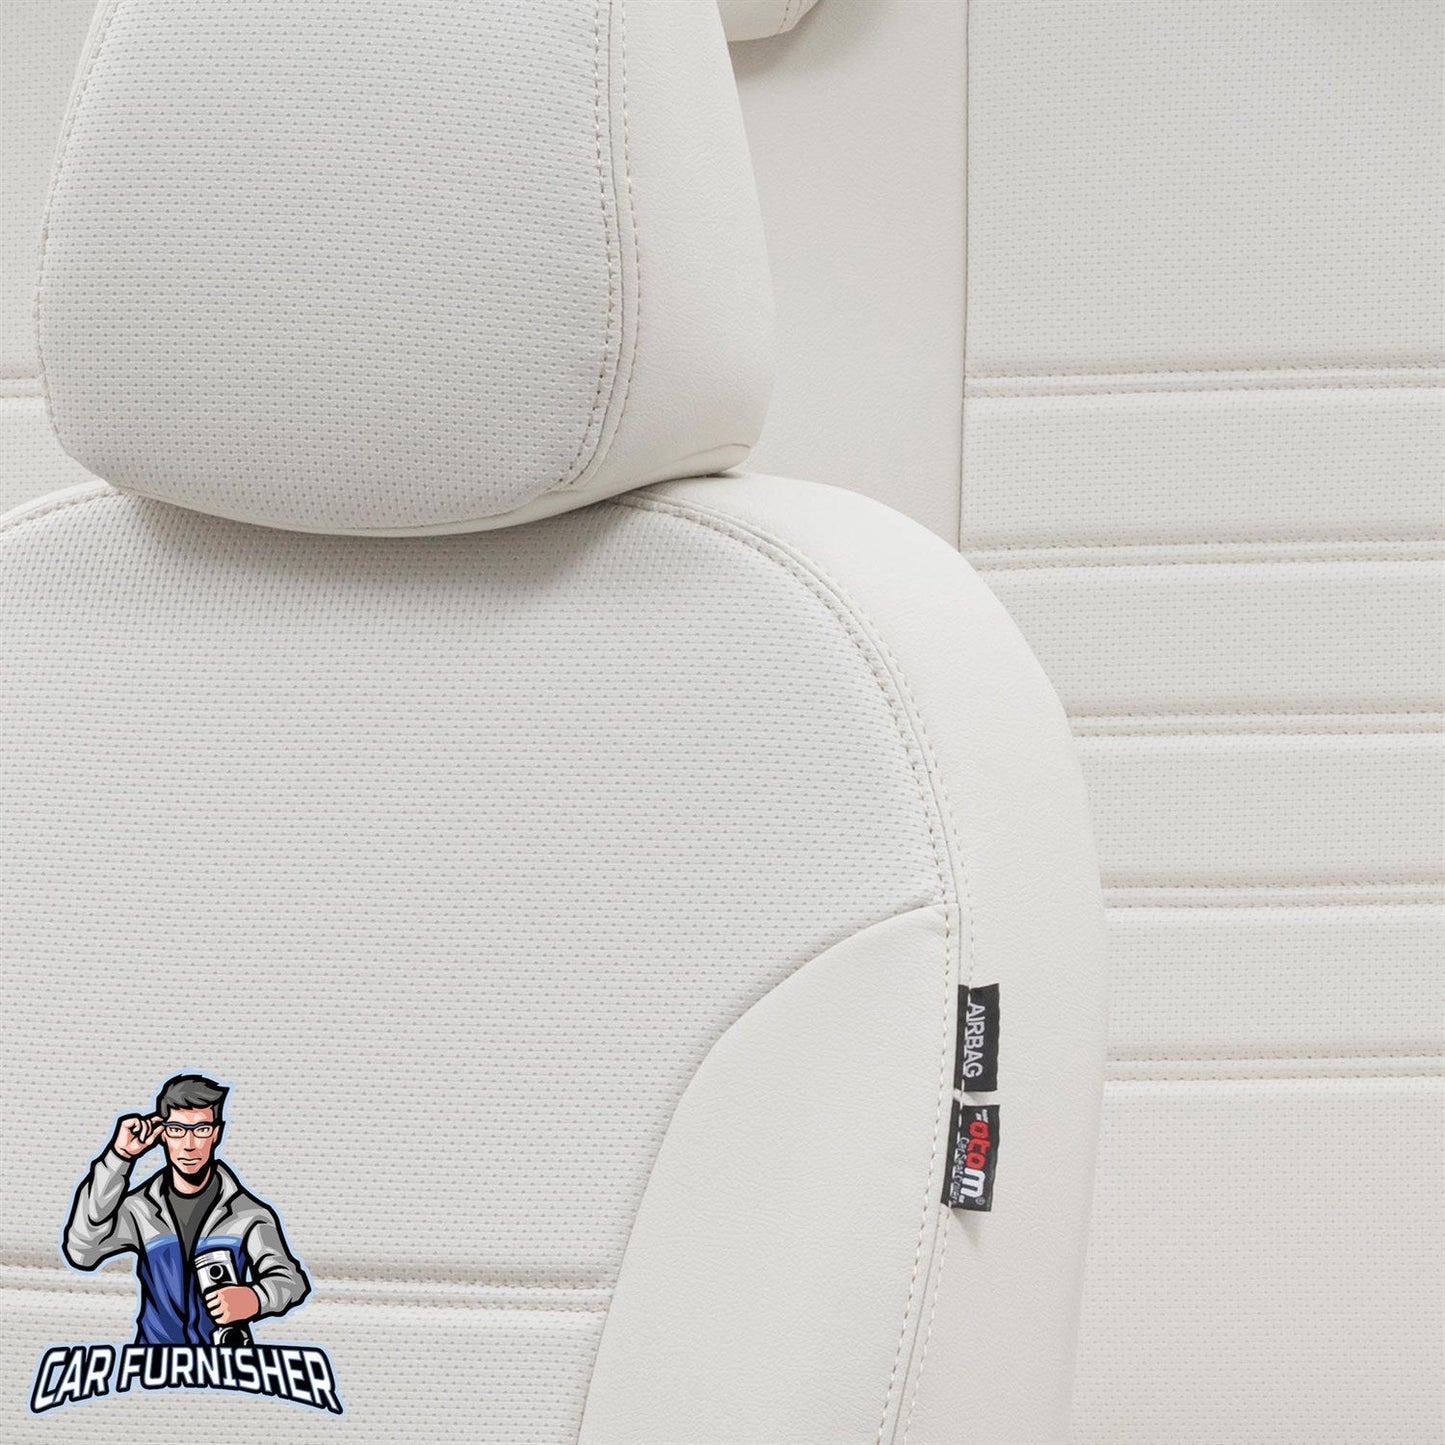 Mercedes E Series Seat Covers New York Leather Design Ivory Leather